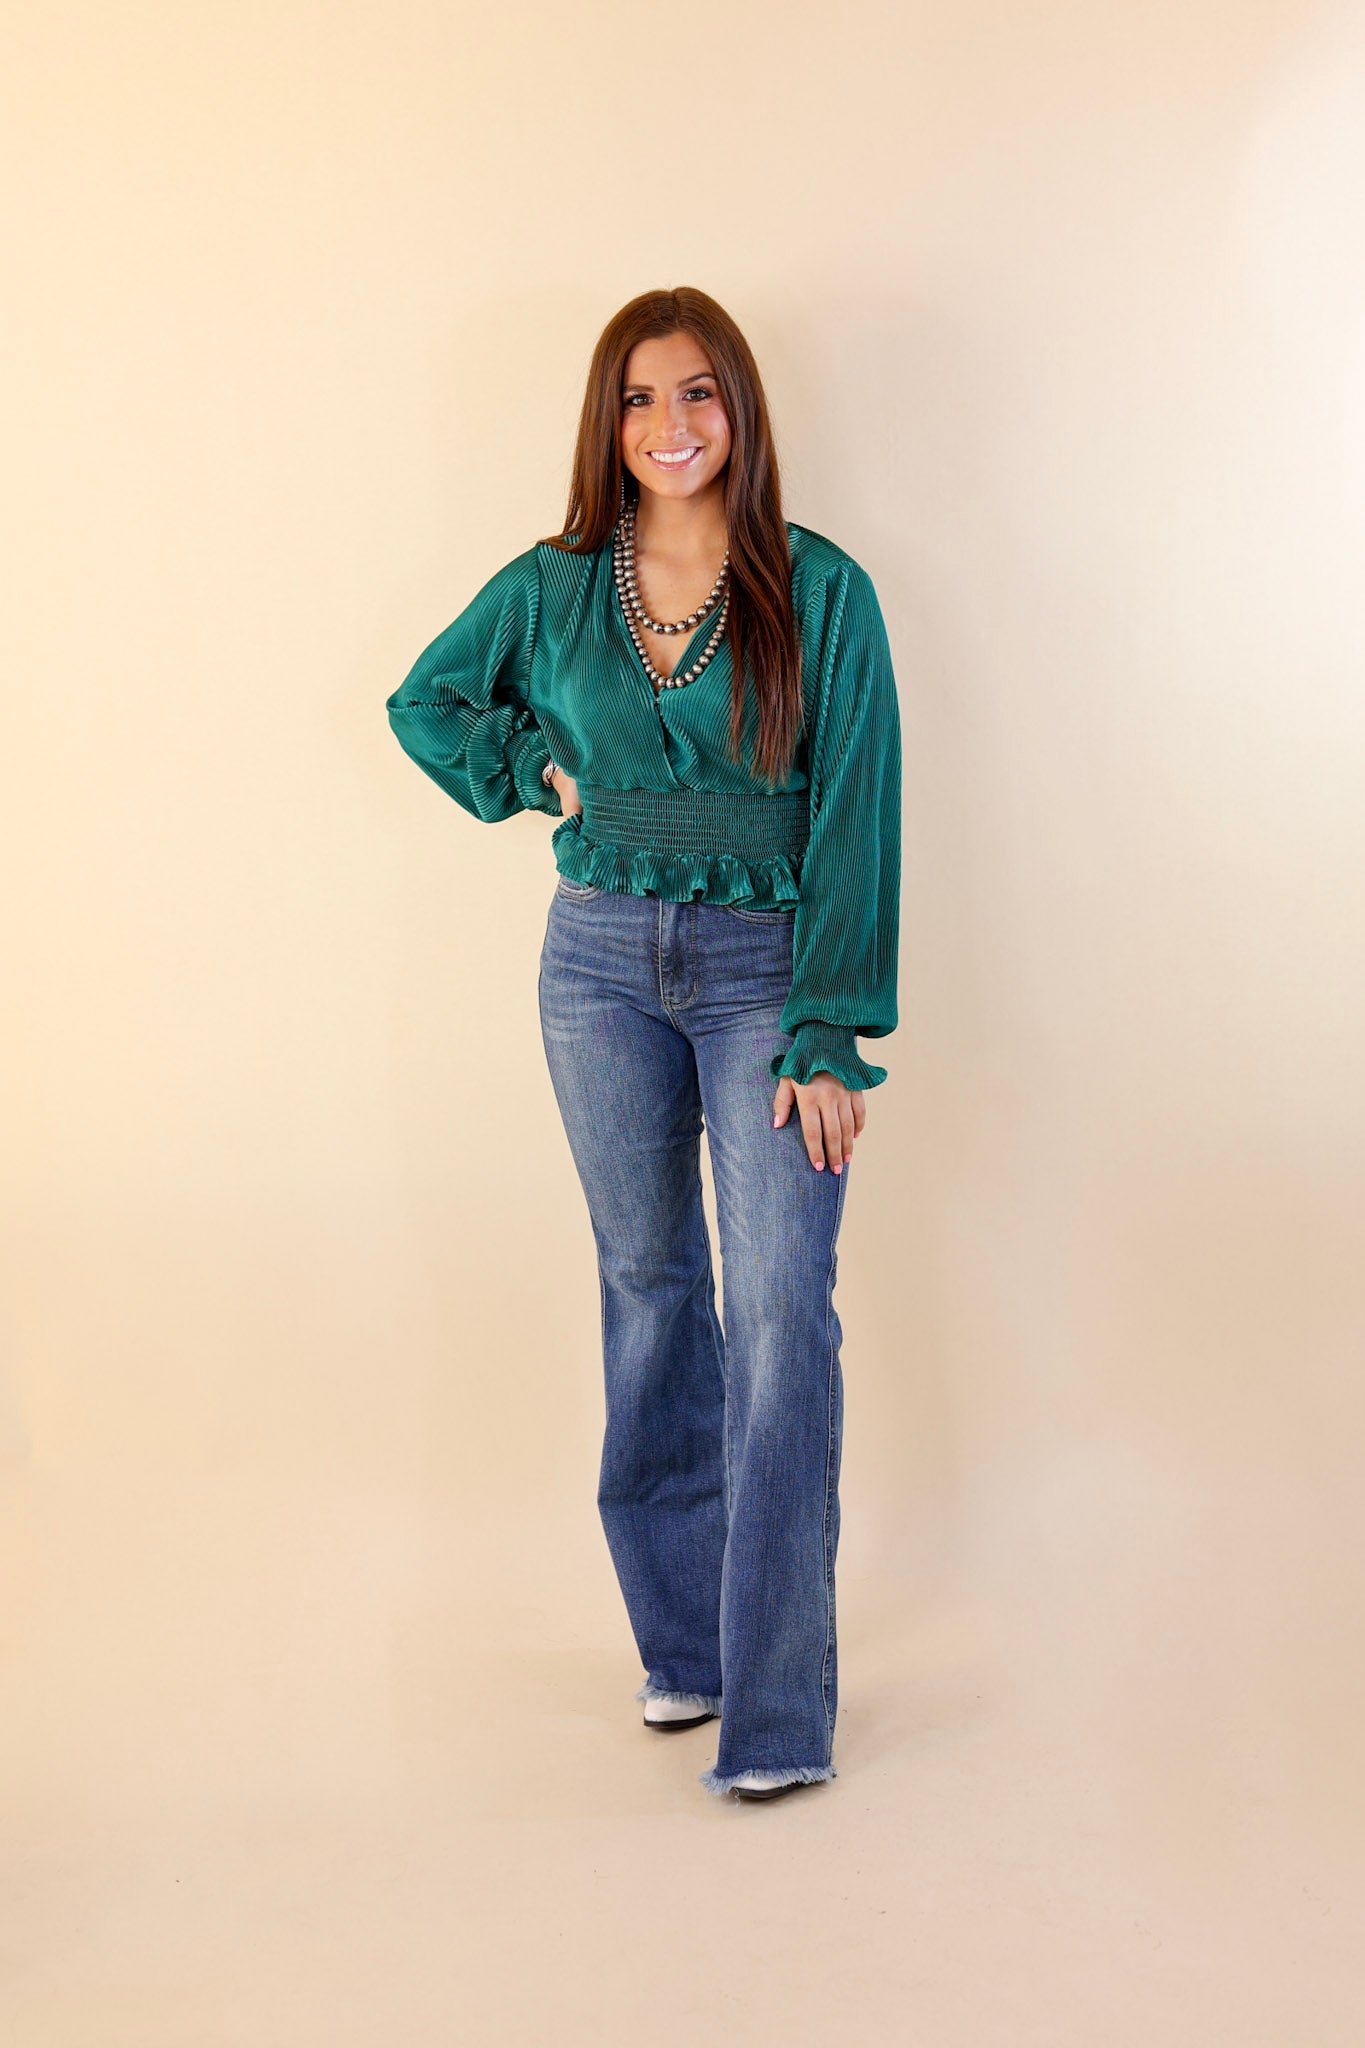 Serving Looks Satin Pleated Long Sleeve Crop Top with V Neck in Emerald Green - Giddy Up Glamour Boutique